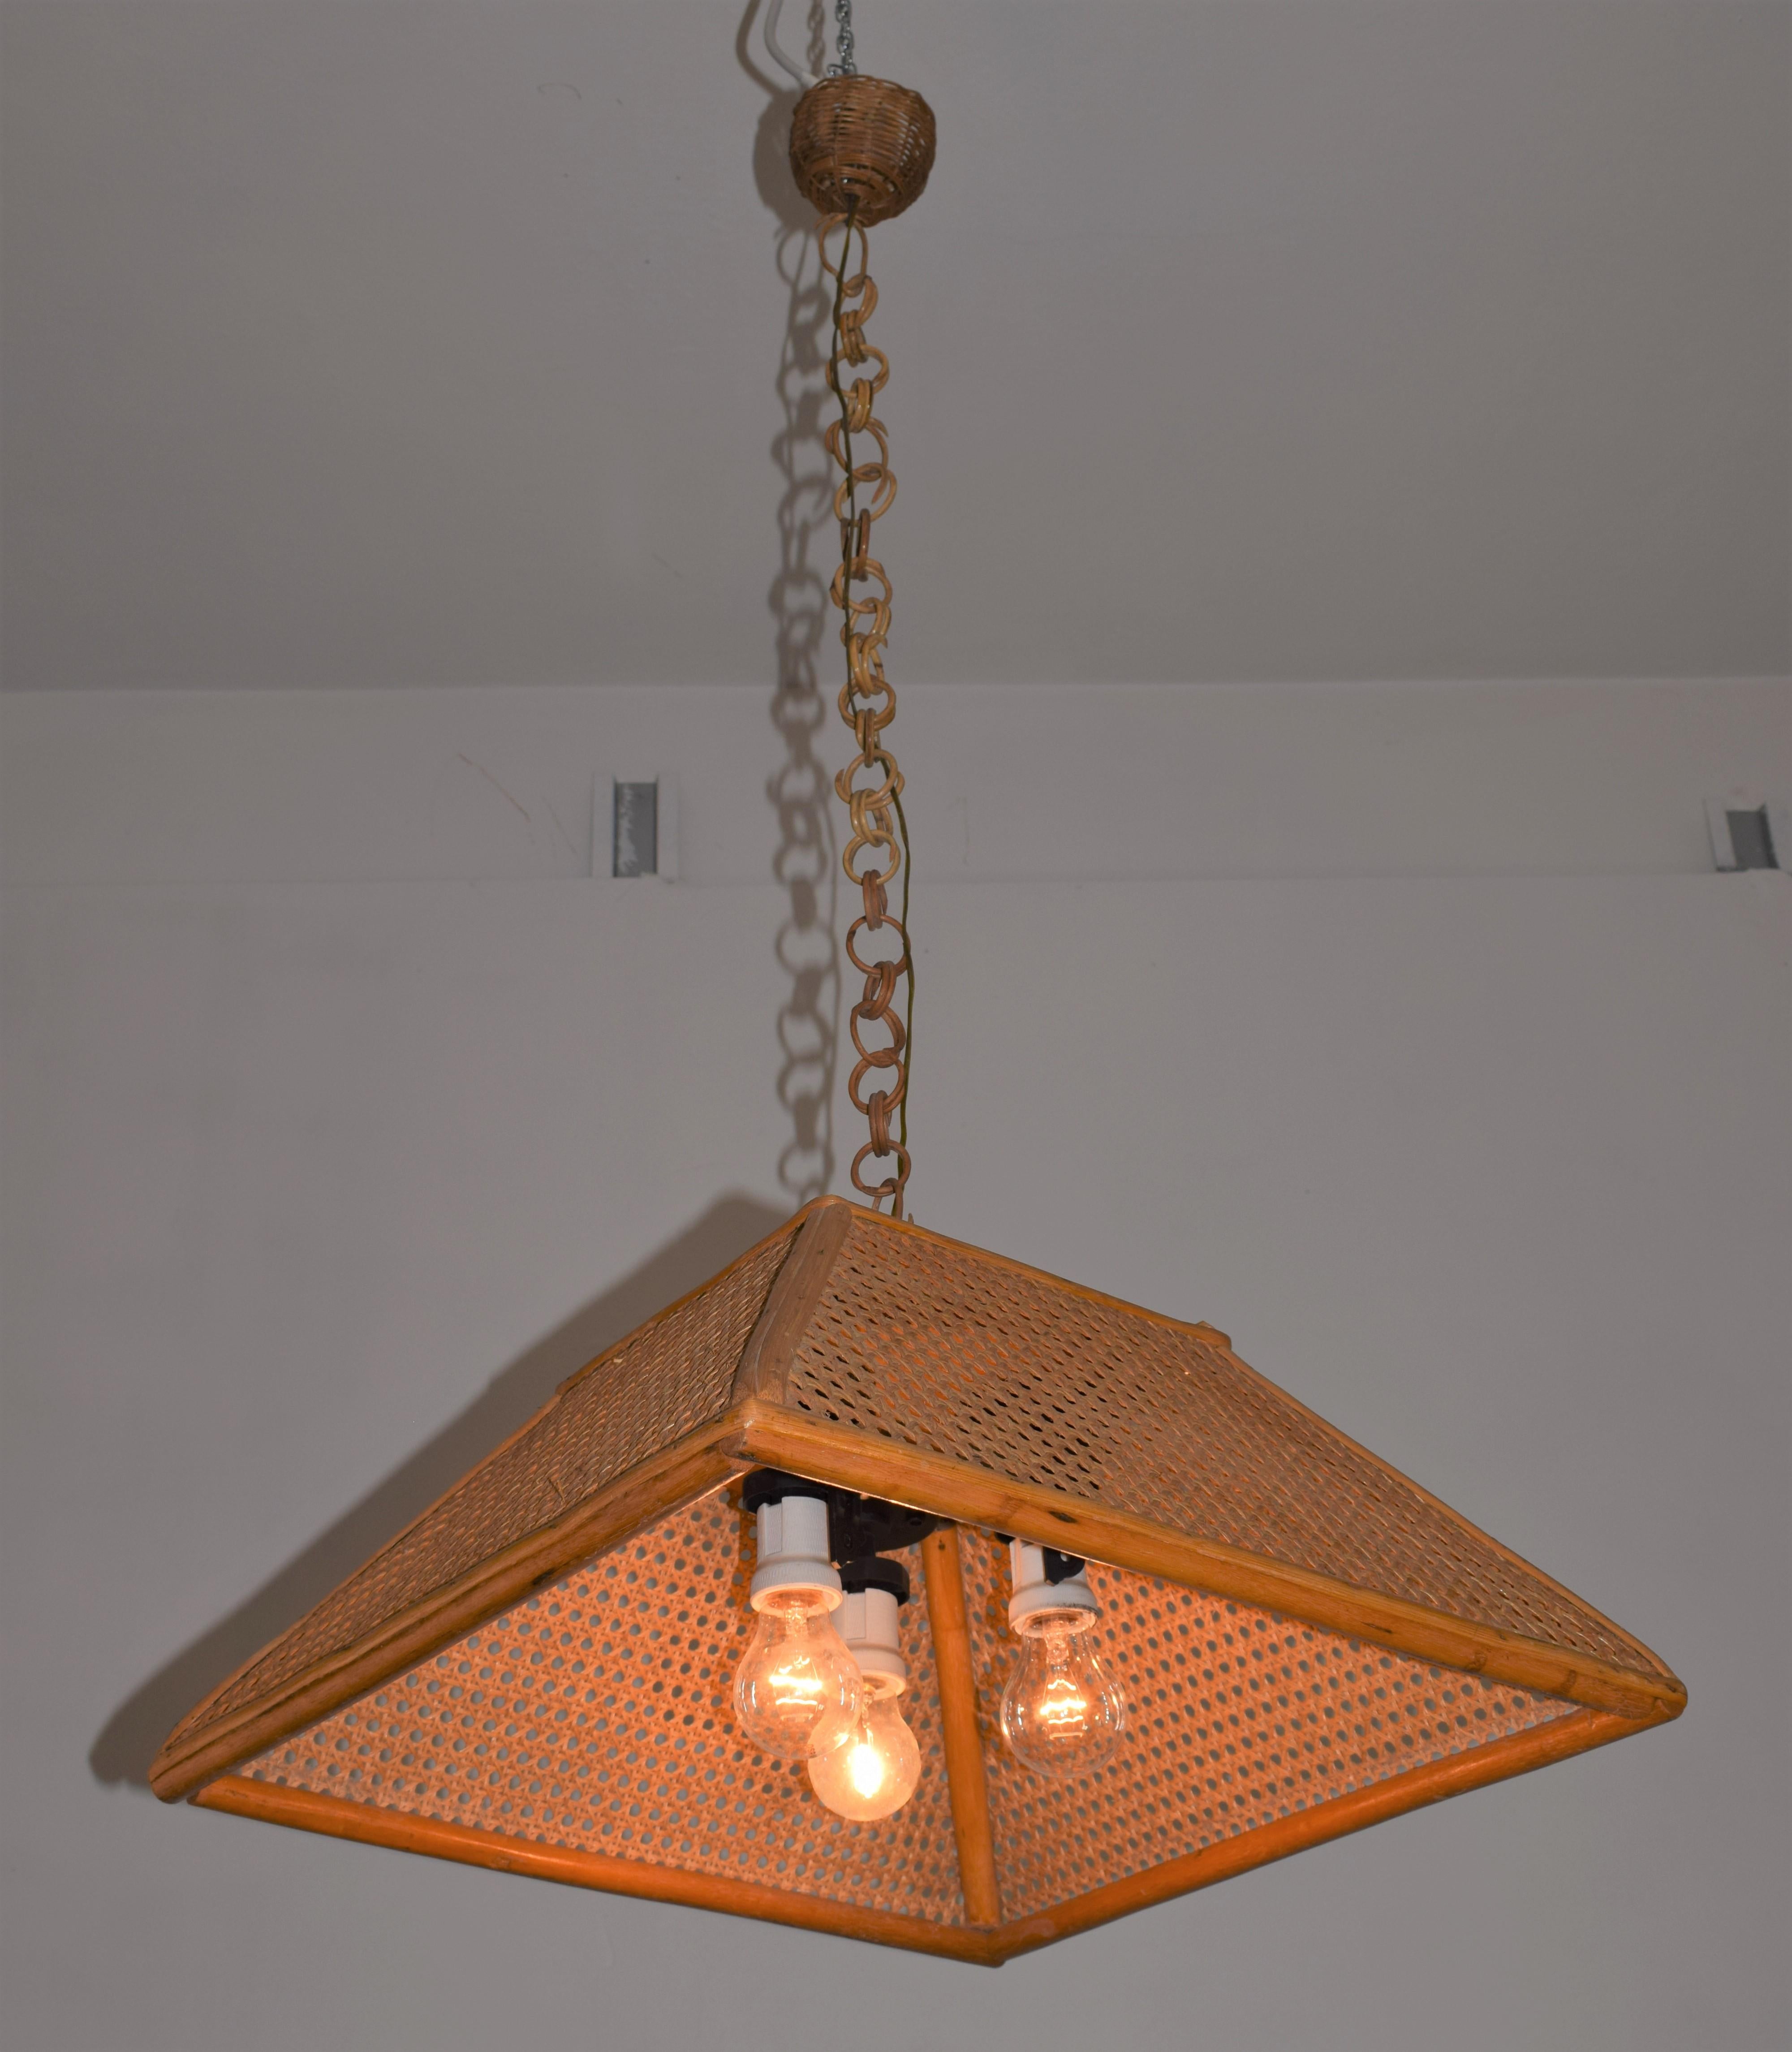 Italian chandelier, bamboo and straw, 1970s.

Dimensions: H = 105 cm; W= 52 cm; D= 52 cm.